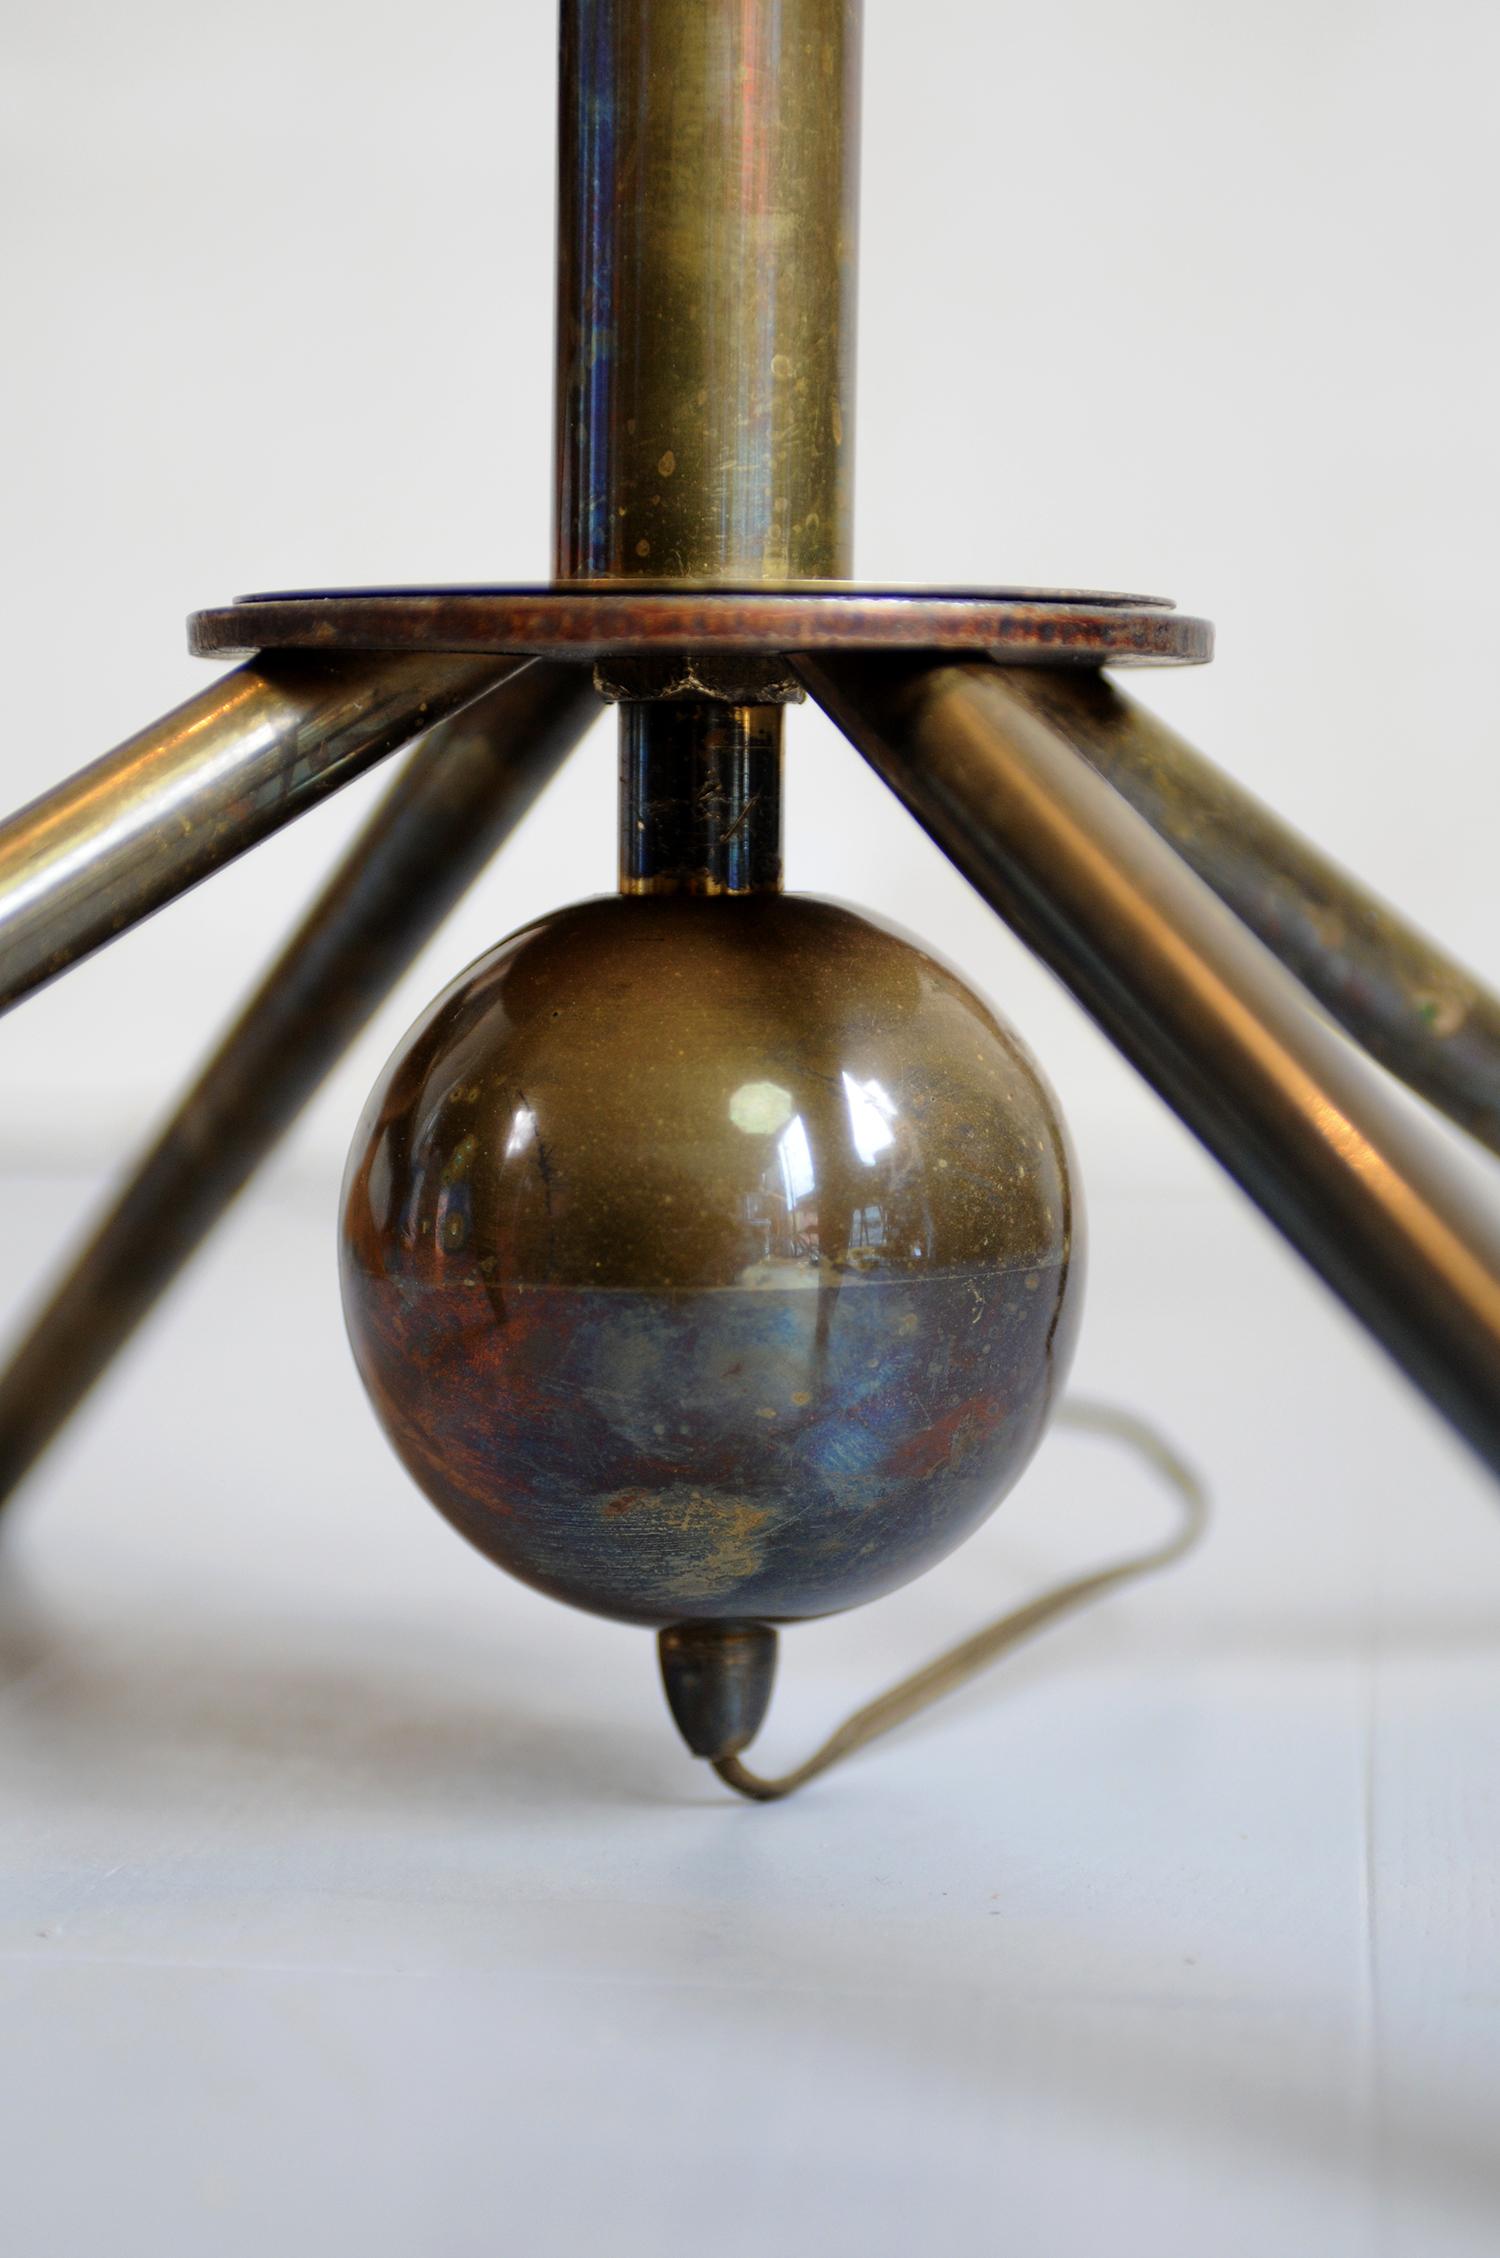 M. Kobis & R. Lorence, floor lamp in varnished brass with adjustable height, France 1950. The reflector is articulated by a double ball joint, the base is heavily weighted by a solid brass sphere.
Documentation: Maison Française n ° 68, June